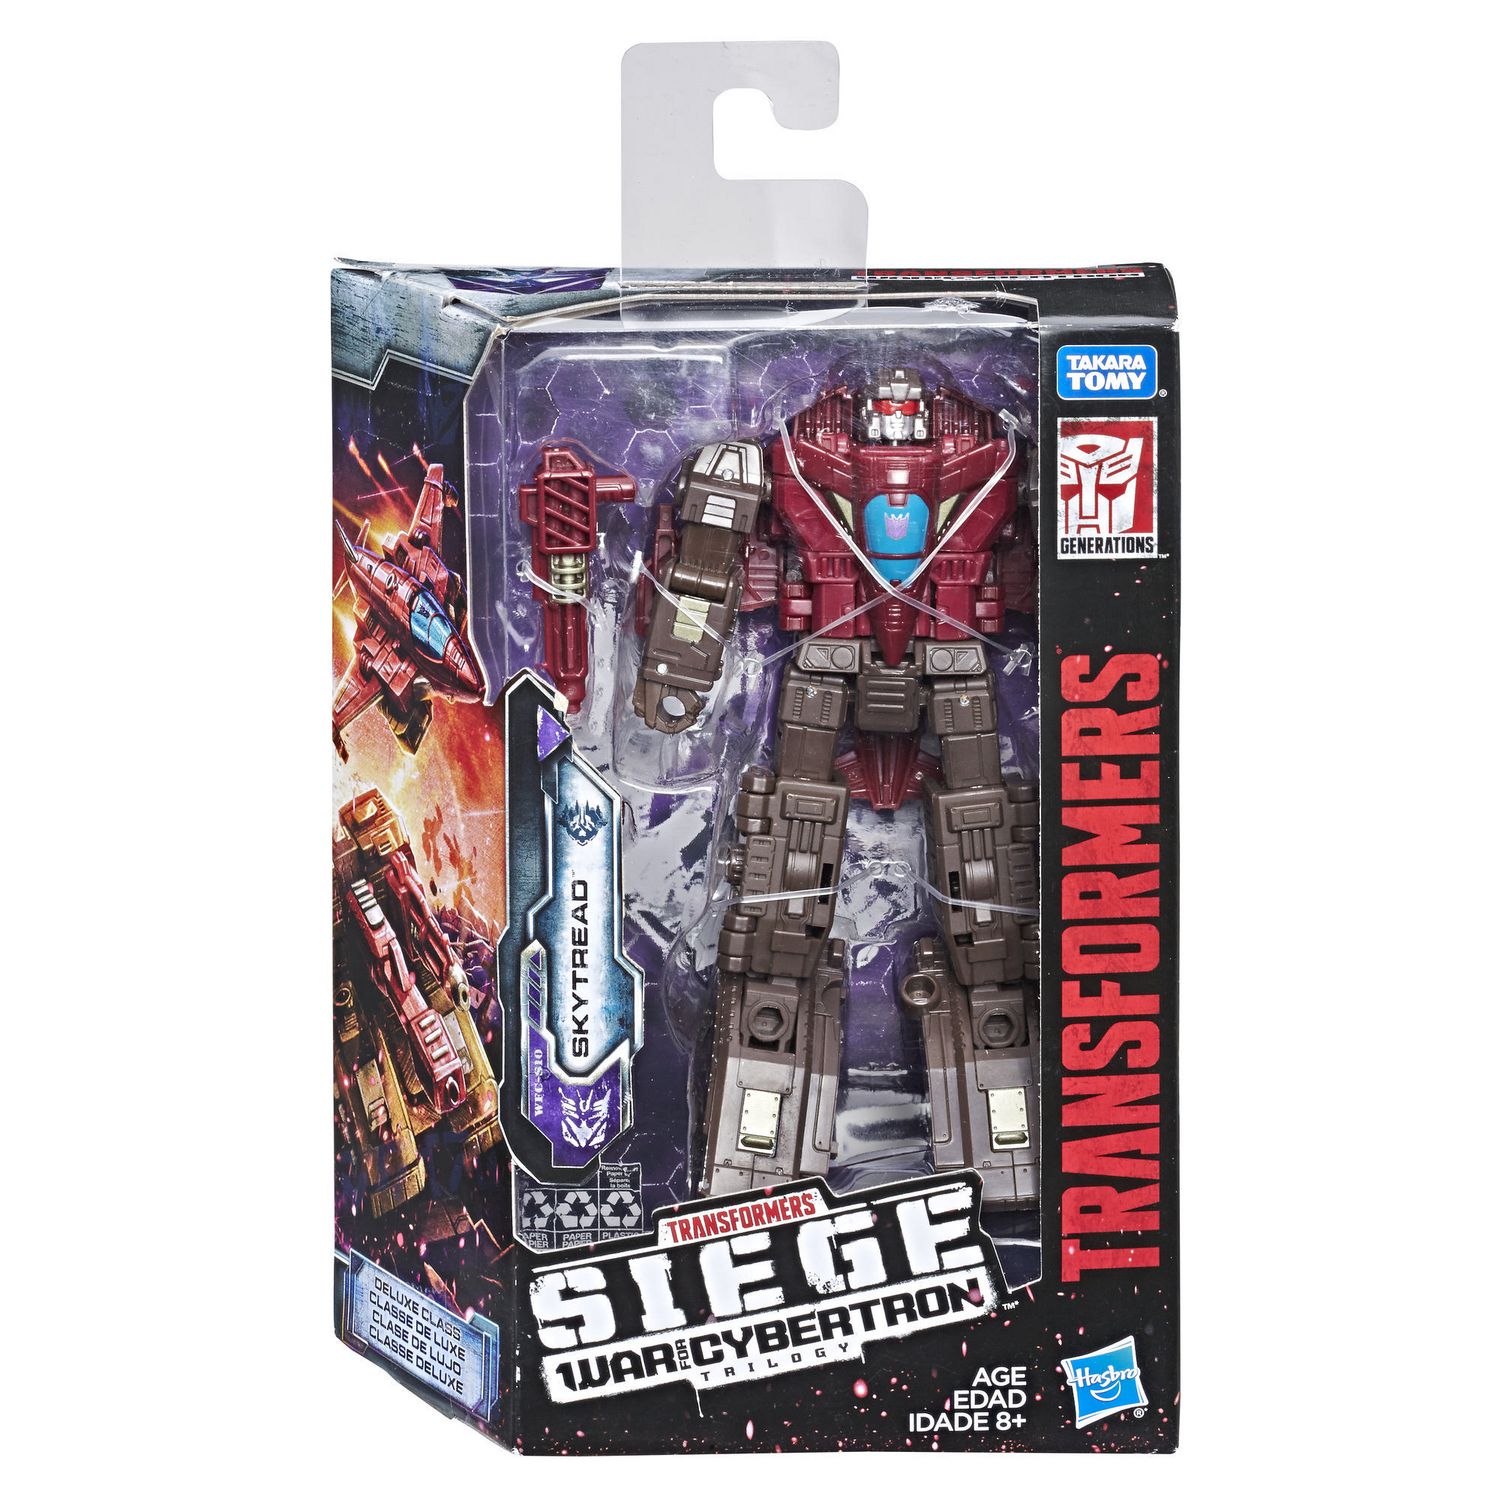 Siege Deluxe Class Skytread Action 